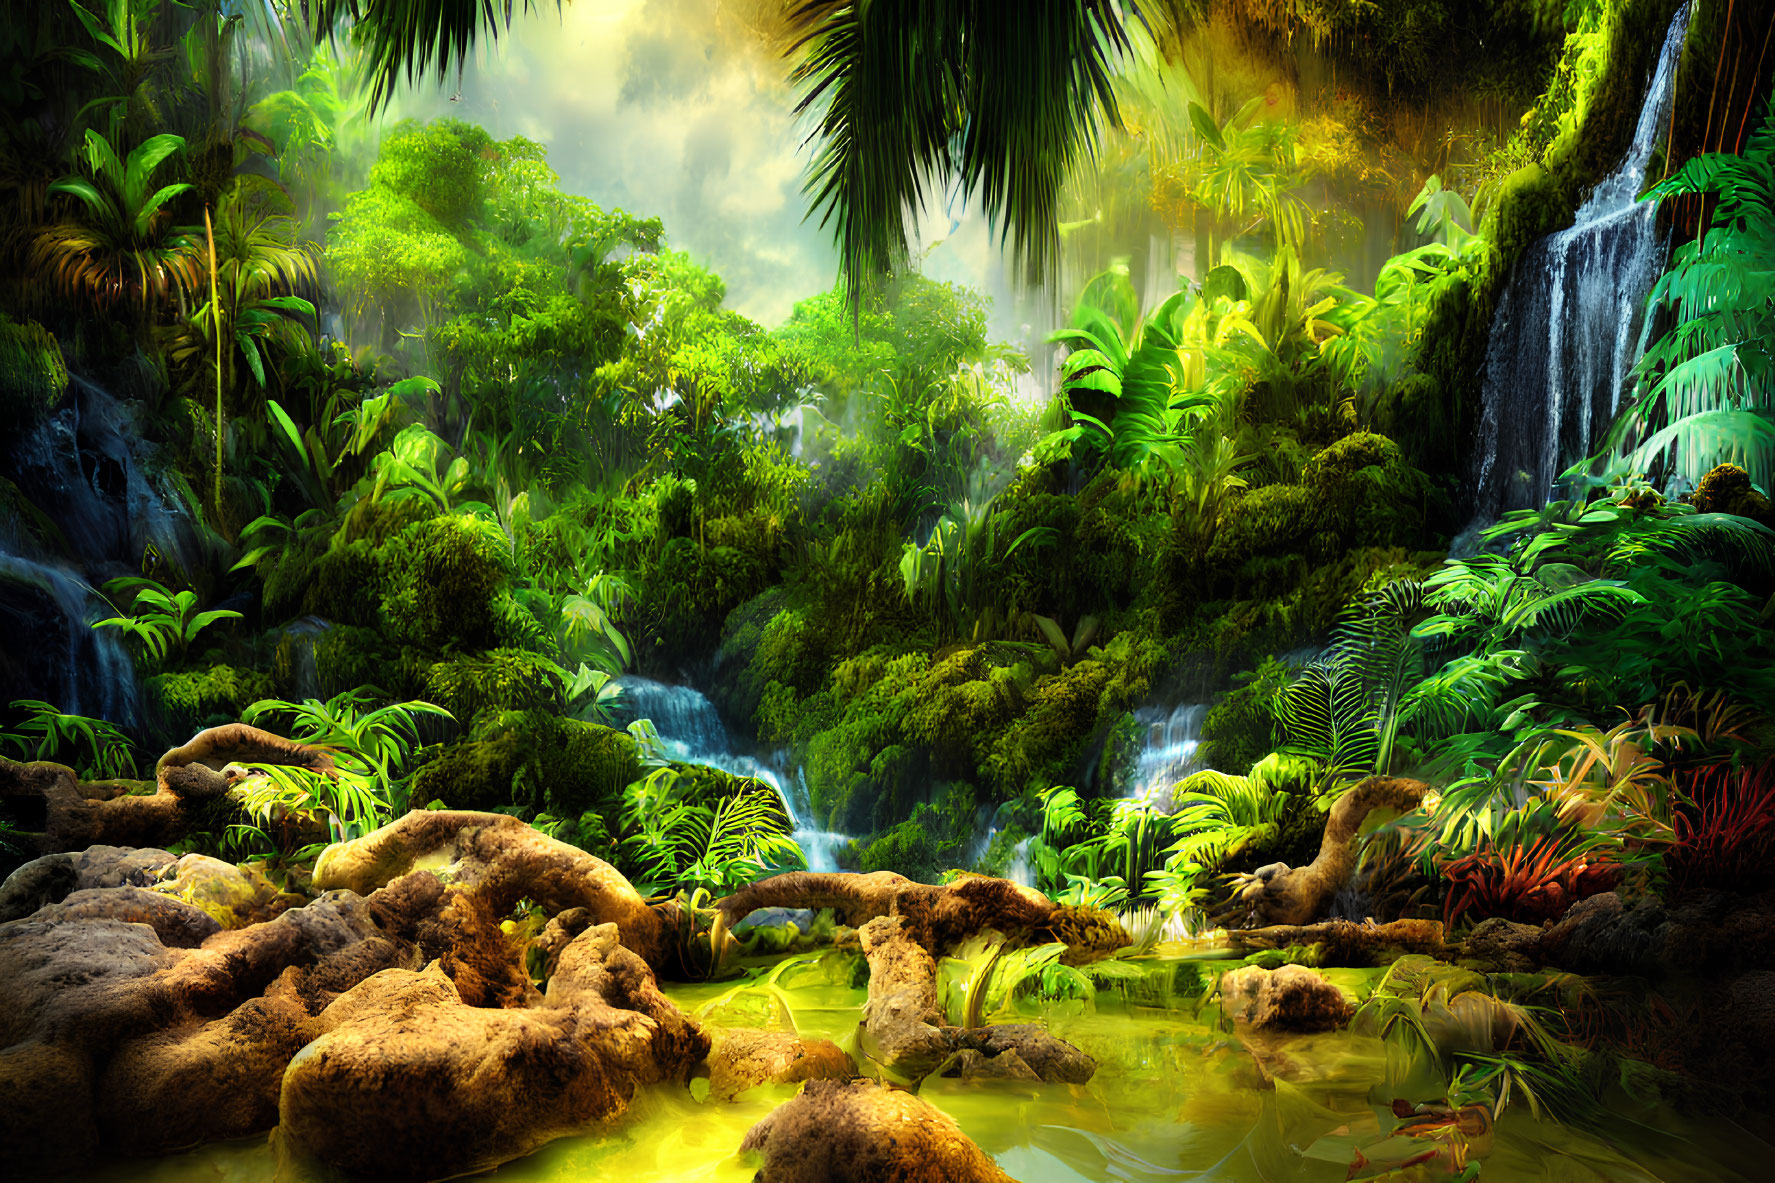 Tropical jungle scenery with waterfalls, lush foliage, mossy stones, and serene pond